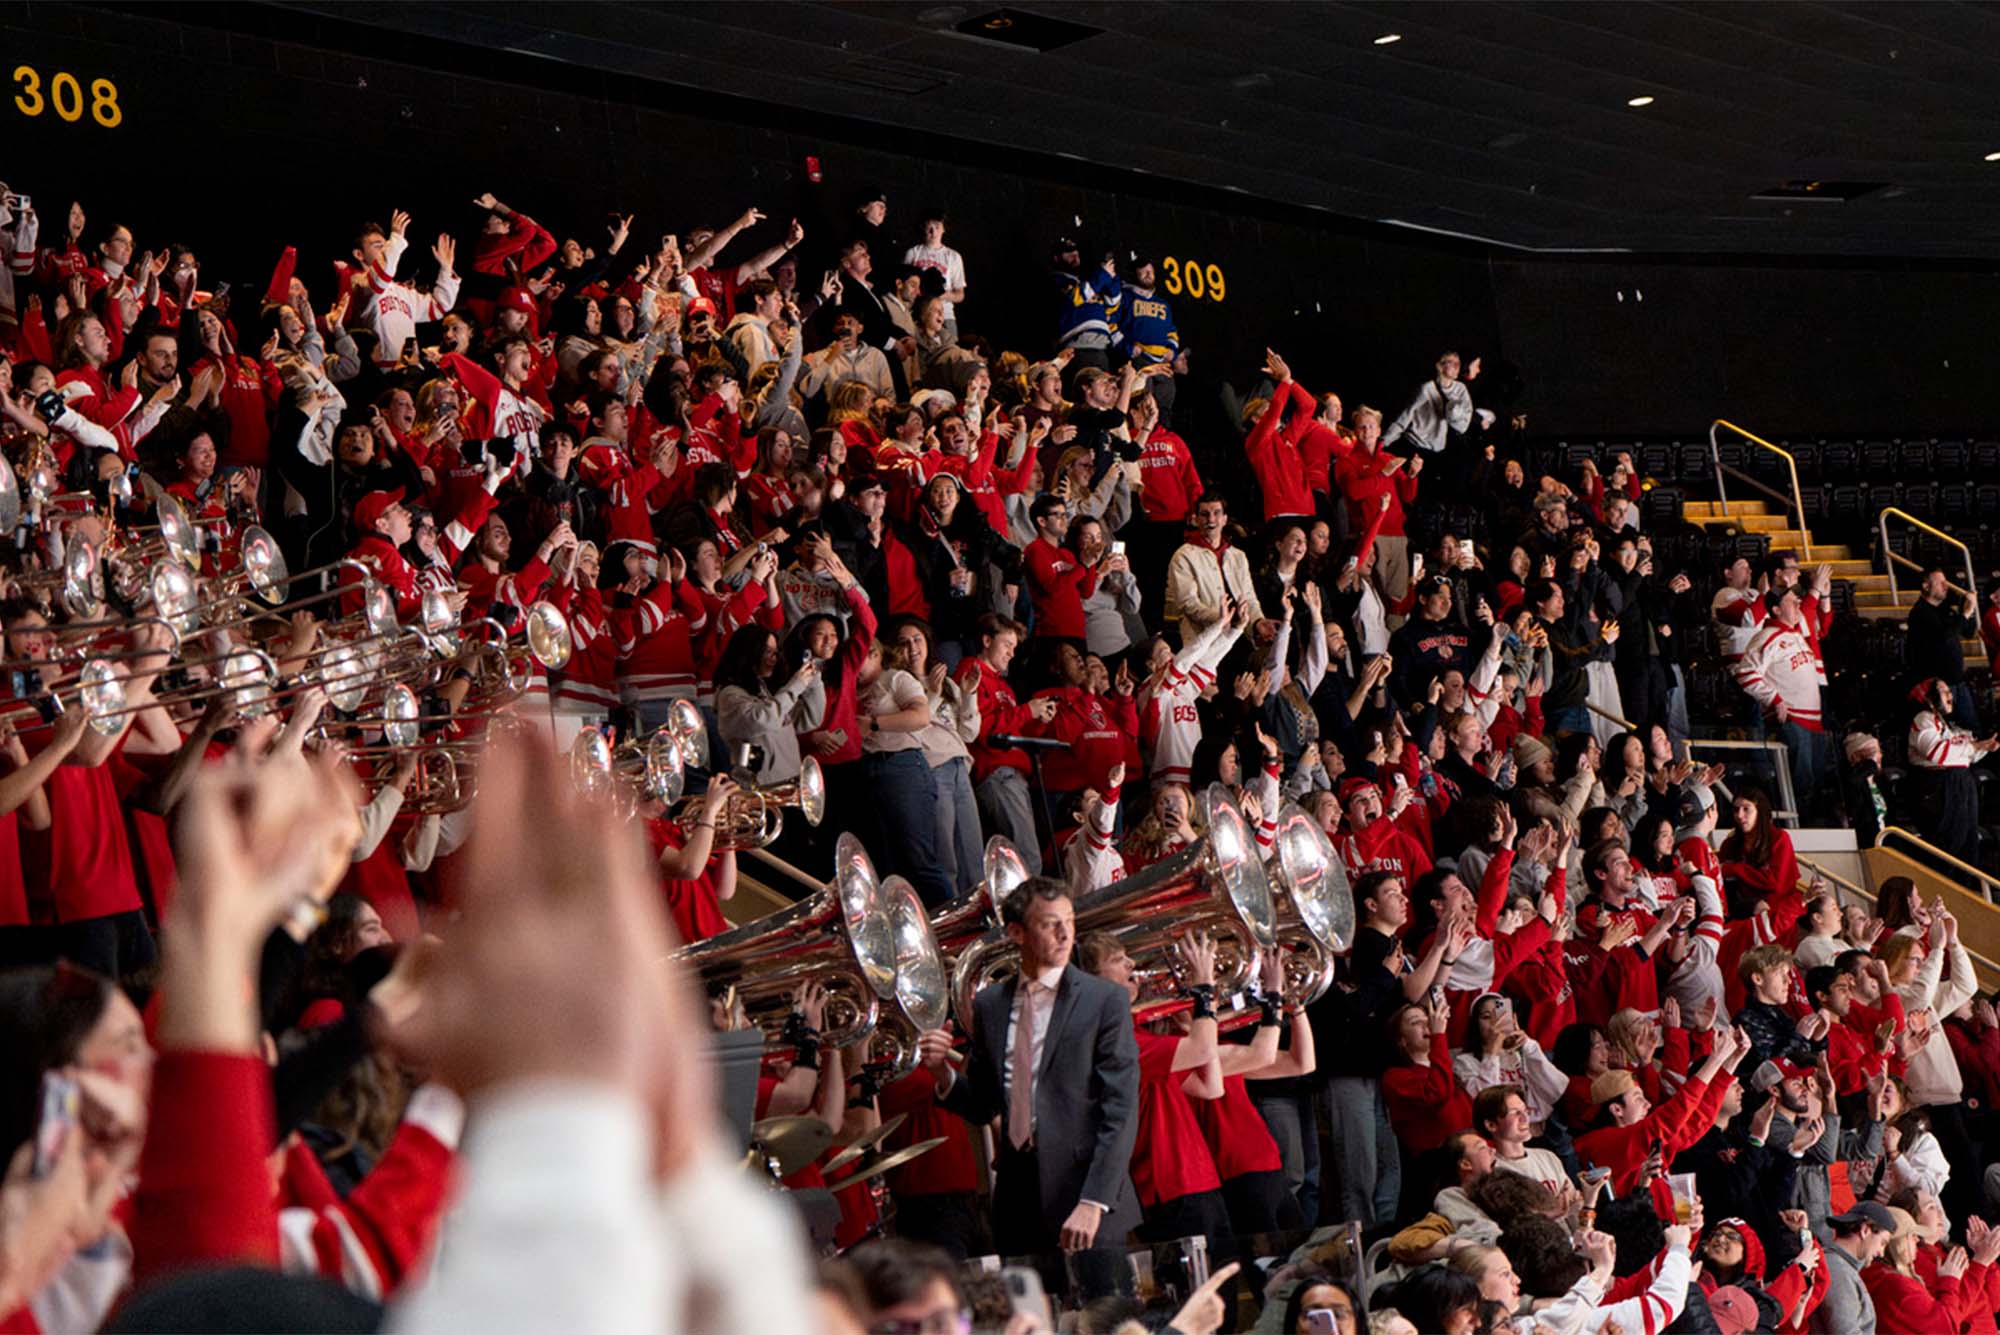 Photo: A sea of red Boston University hockey jerseys in the crowd at the Beanpot semifinal game